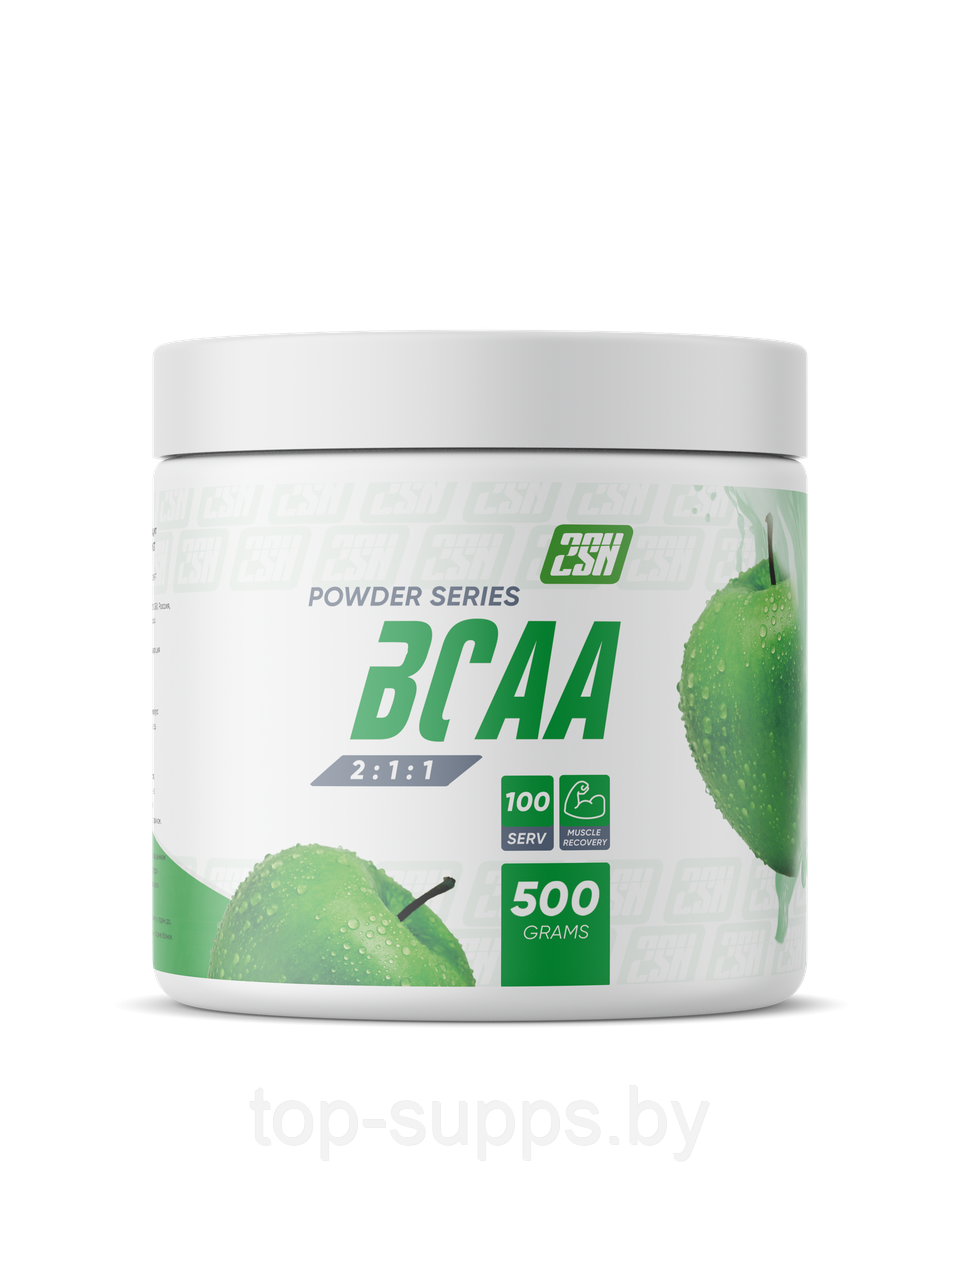 2SN BCAA 2:1:1 Powder from 2SN, 500g (100 servings) - фото 2 - id-p208806361